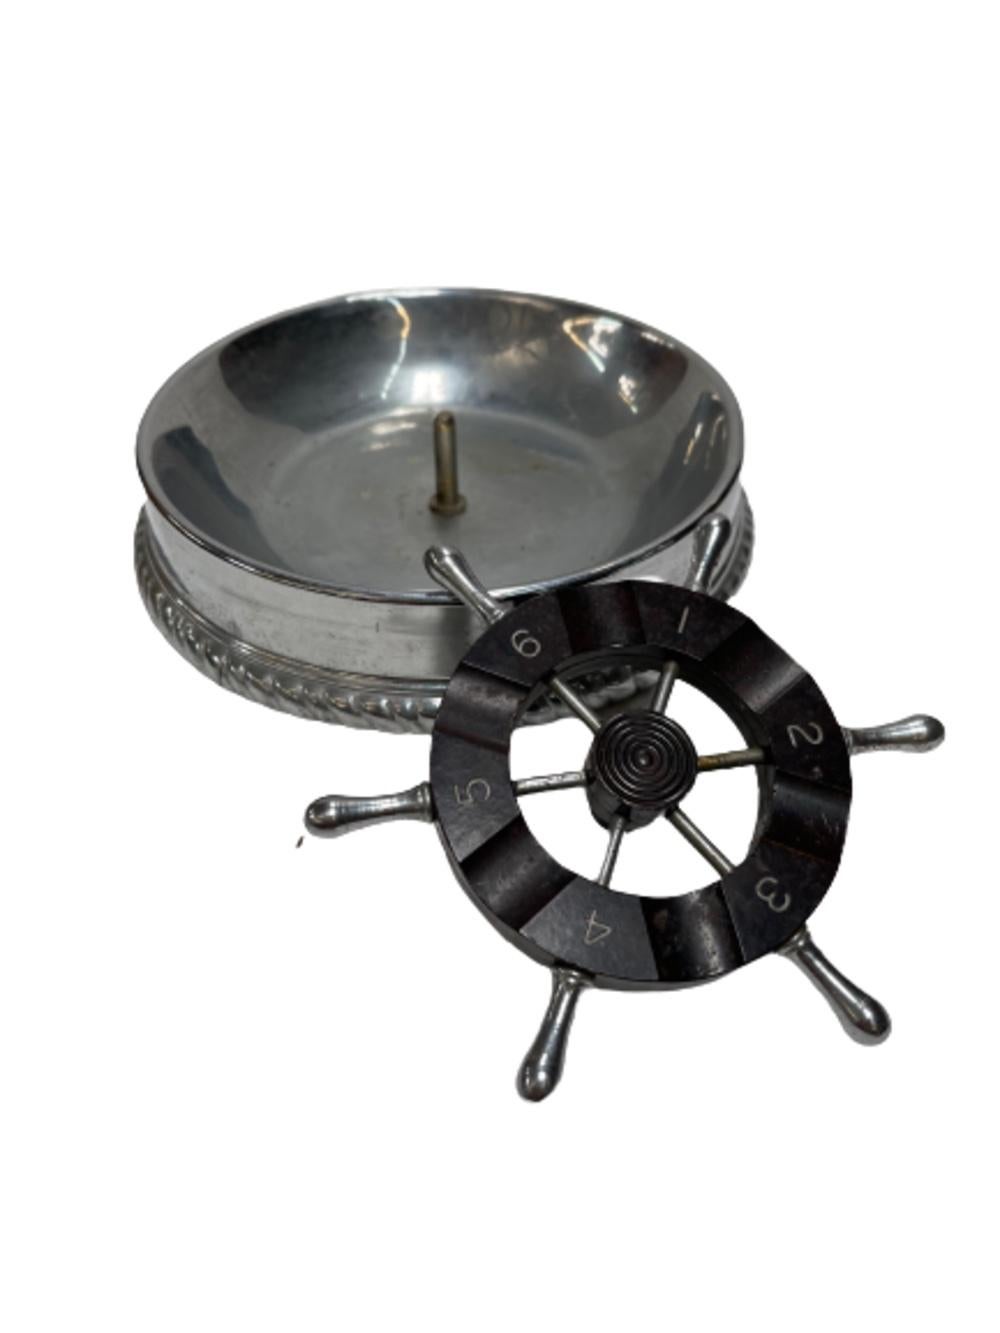 Ashtray 6 Handle, Wheel In Excellent Condition For Sale In Van Nuys, CA